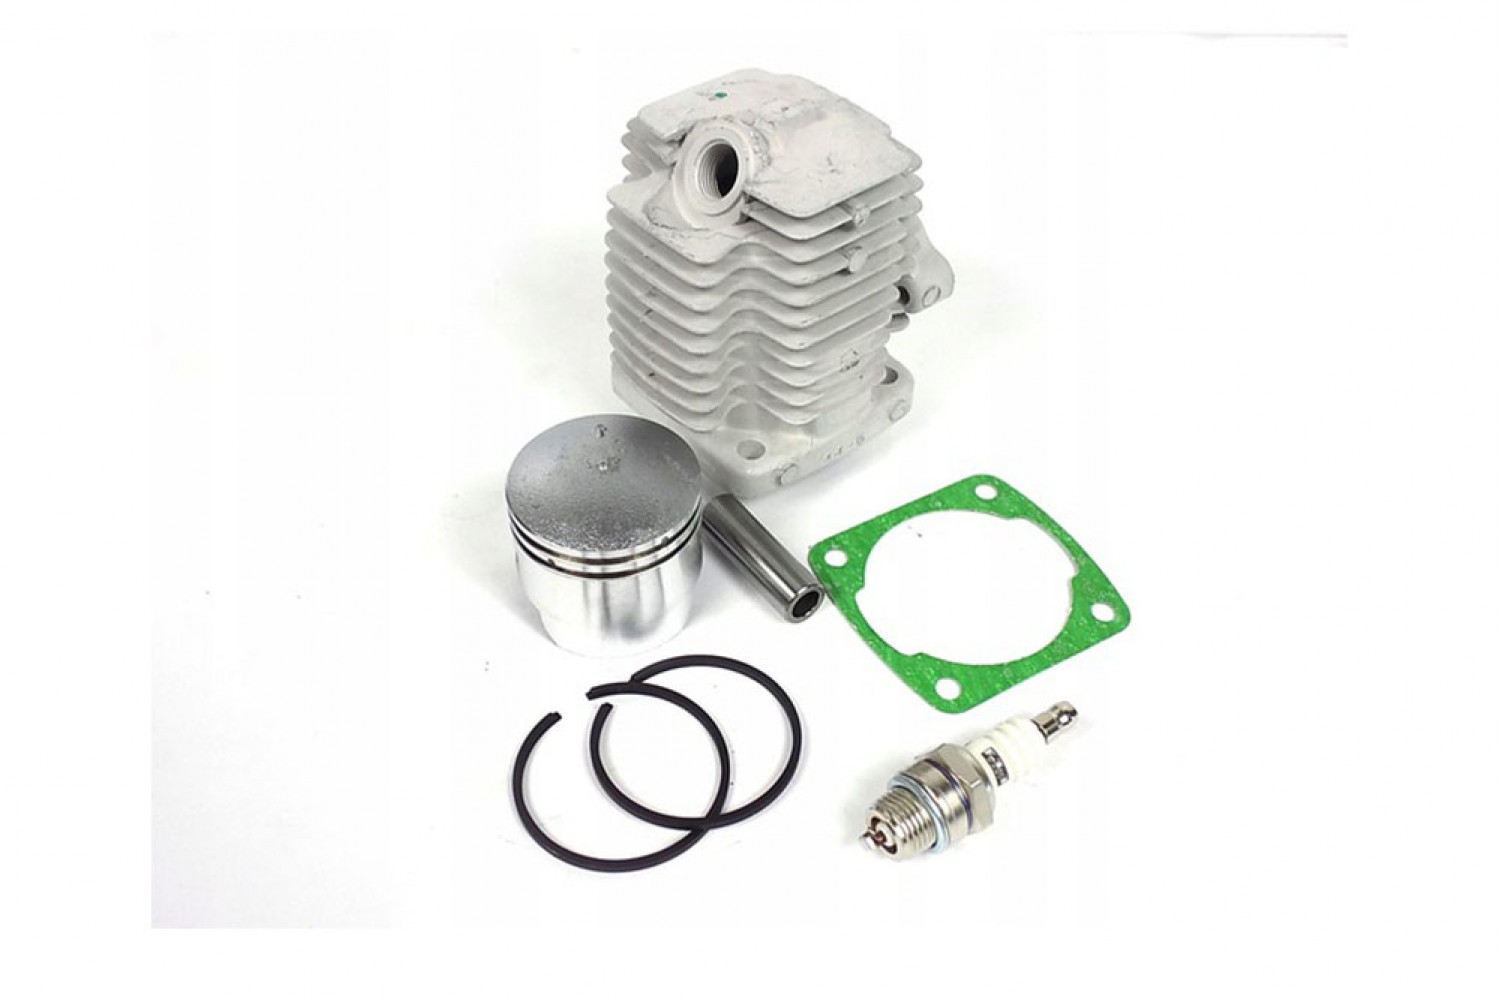 WOOSTAR 44mm Big Bore Cylinder with Recoil Starter with Carburetor and Air Filter Modified Engine Kit Replacement for 2 Stroke 43cc 47cc 49cc 52cc Mini Pocket Bike Gas Moped Scooter Red 